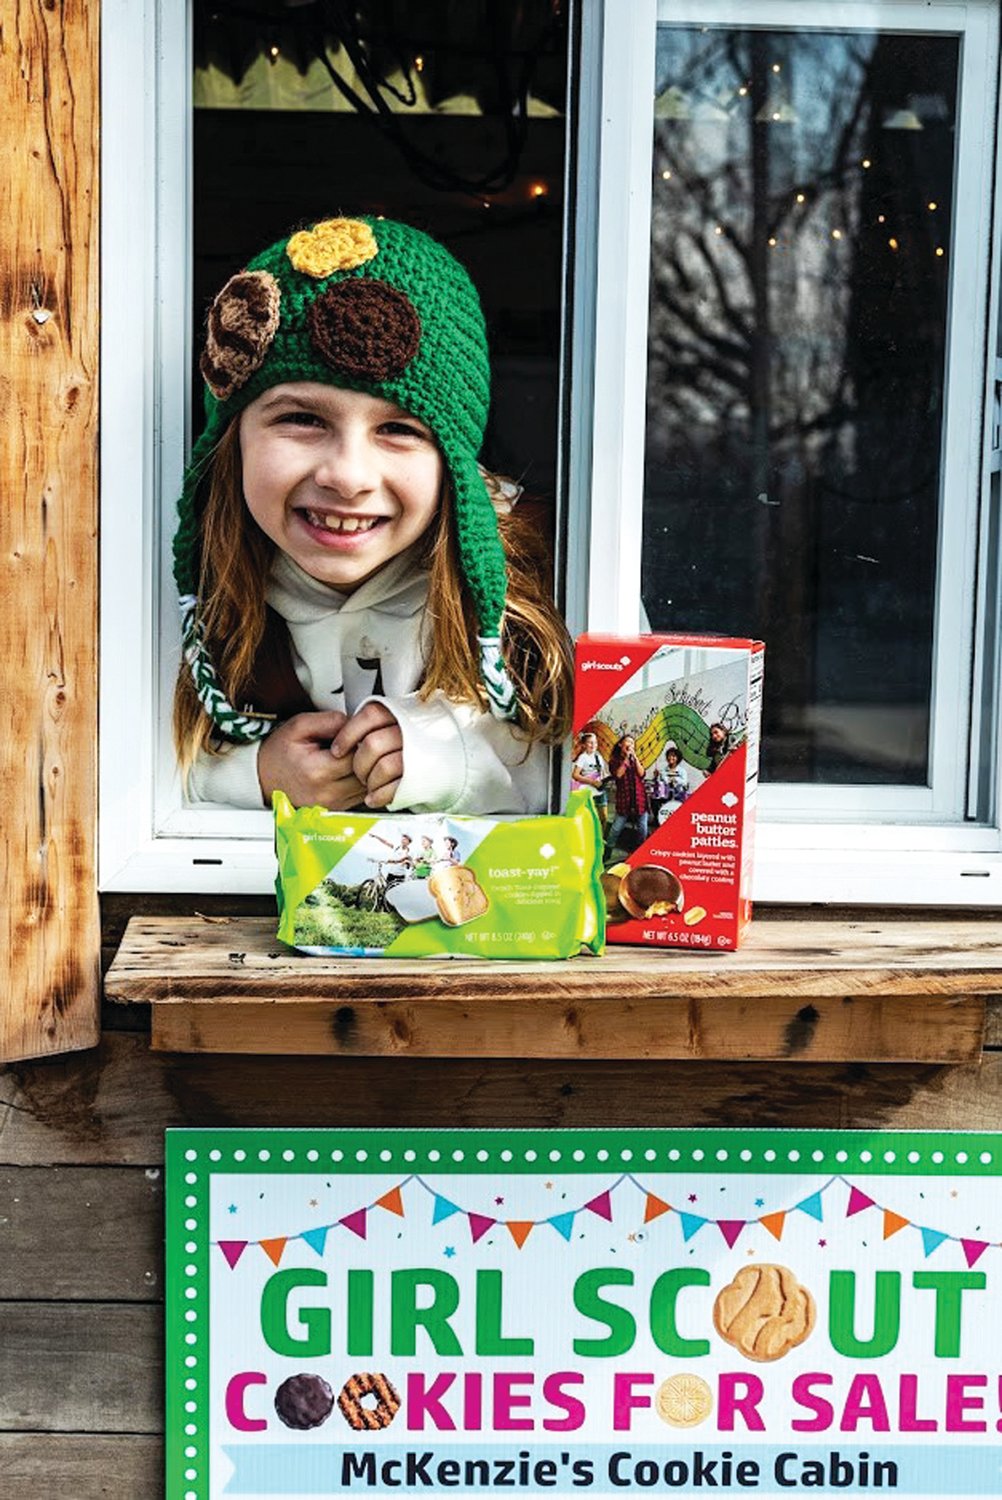 McKenzie Keefe loves her Girl Scout cookie cabin, built by her dad, and loves selling Girl Scout cookies for her Quakertown Brownie troop.